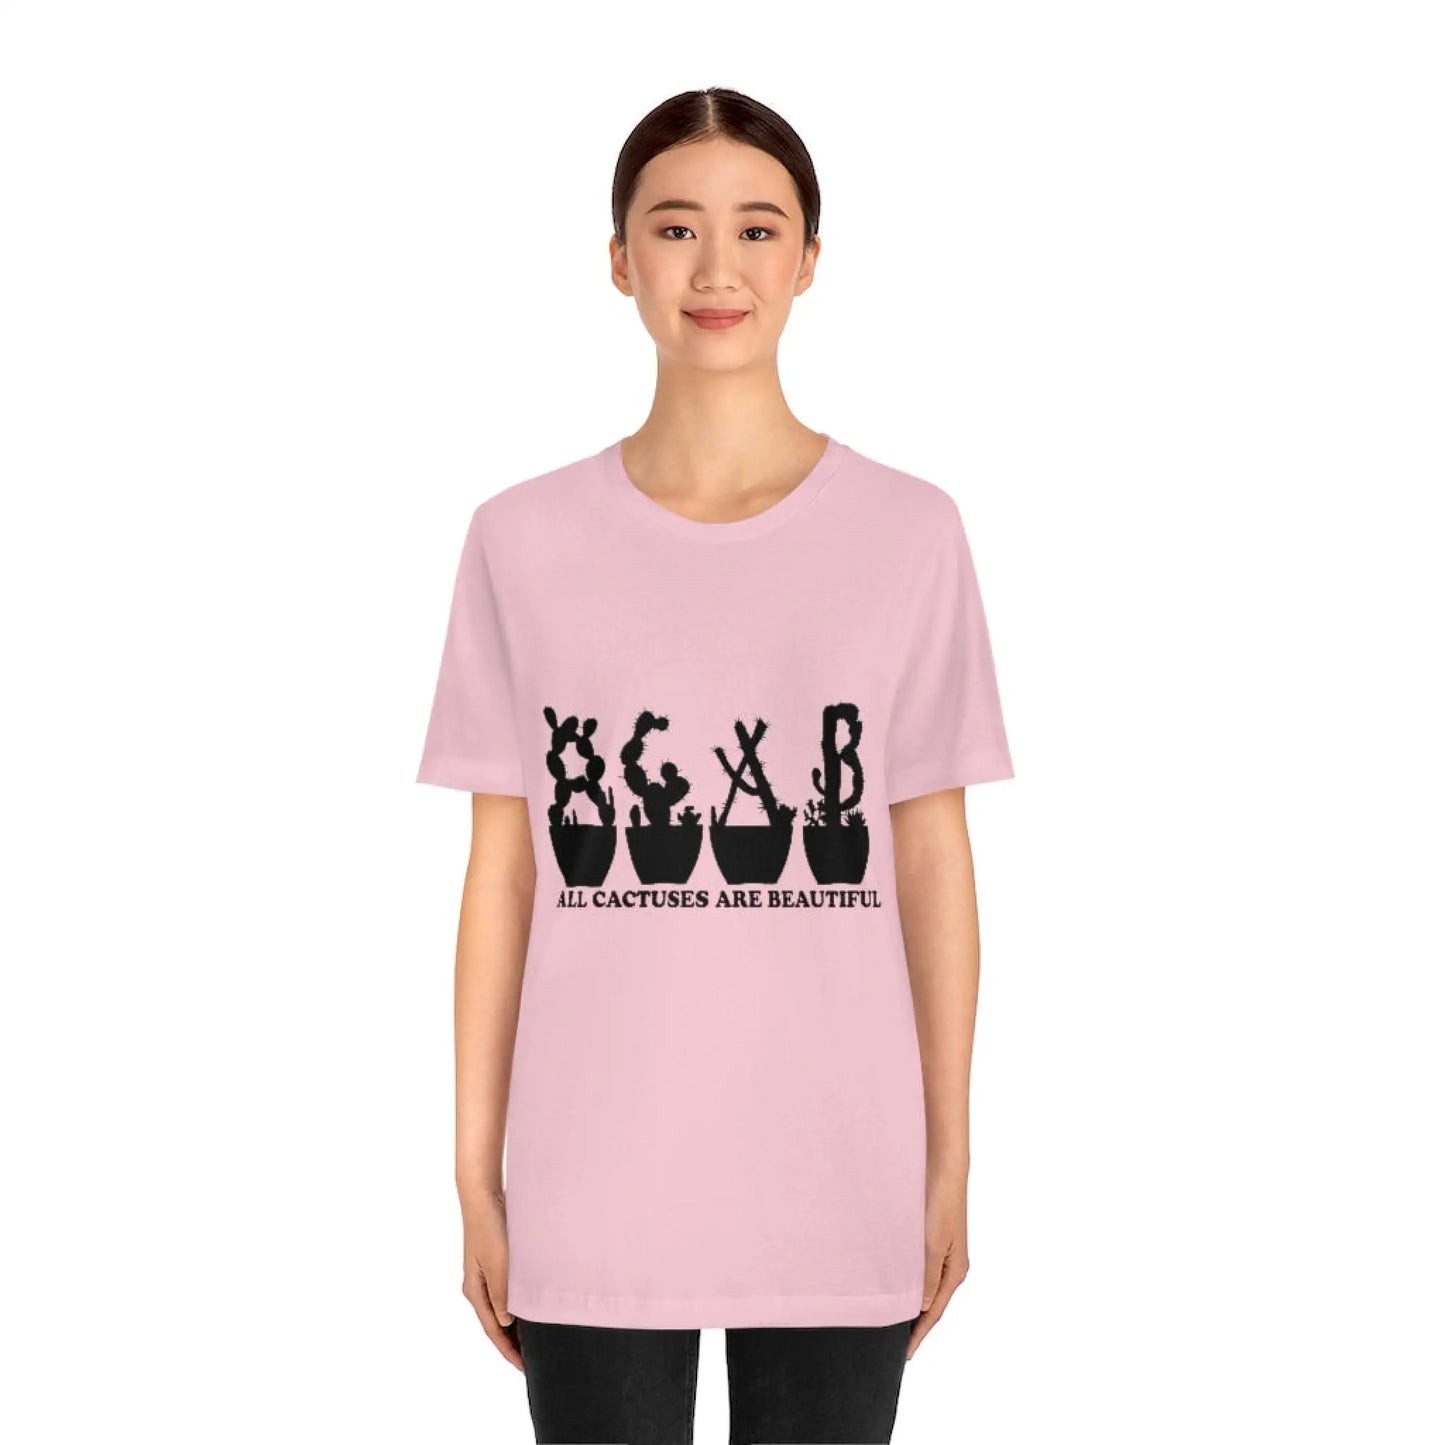 Shirts XL - All Cactuses Are Beautiful - T-Shirt